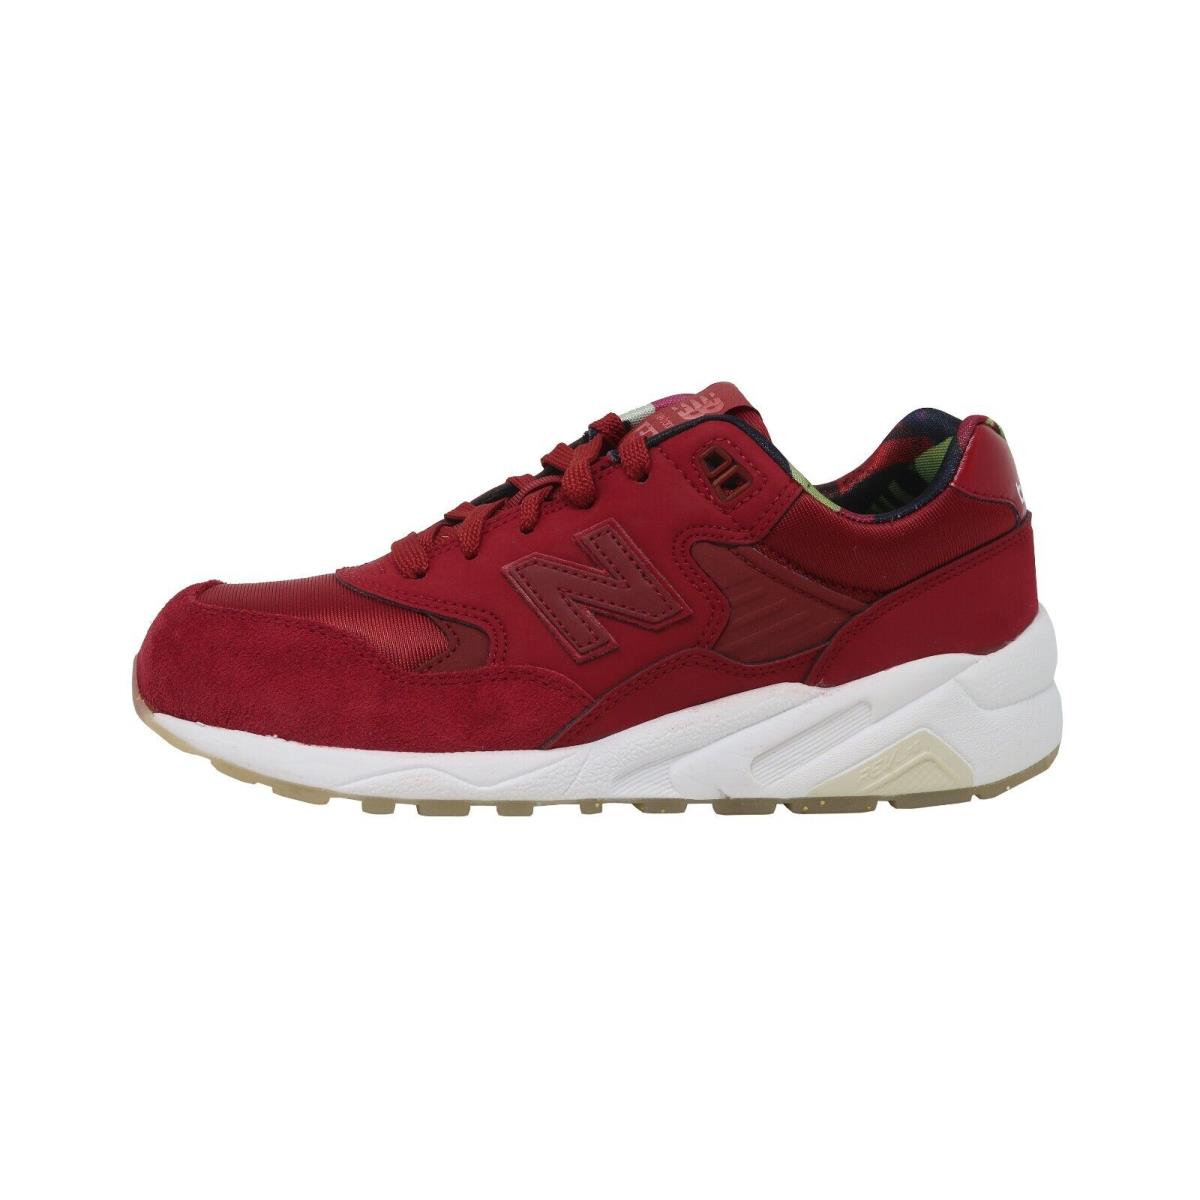 New Balance Women`s Lifestyle Running Shoes Sneakers WRT580RR - Red/white